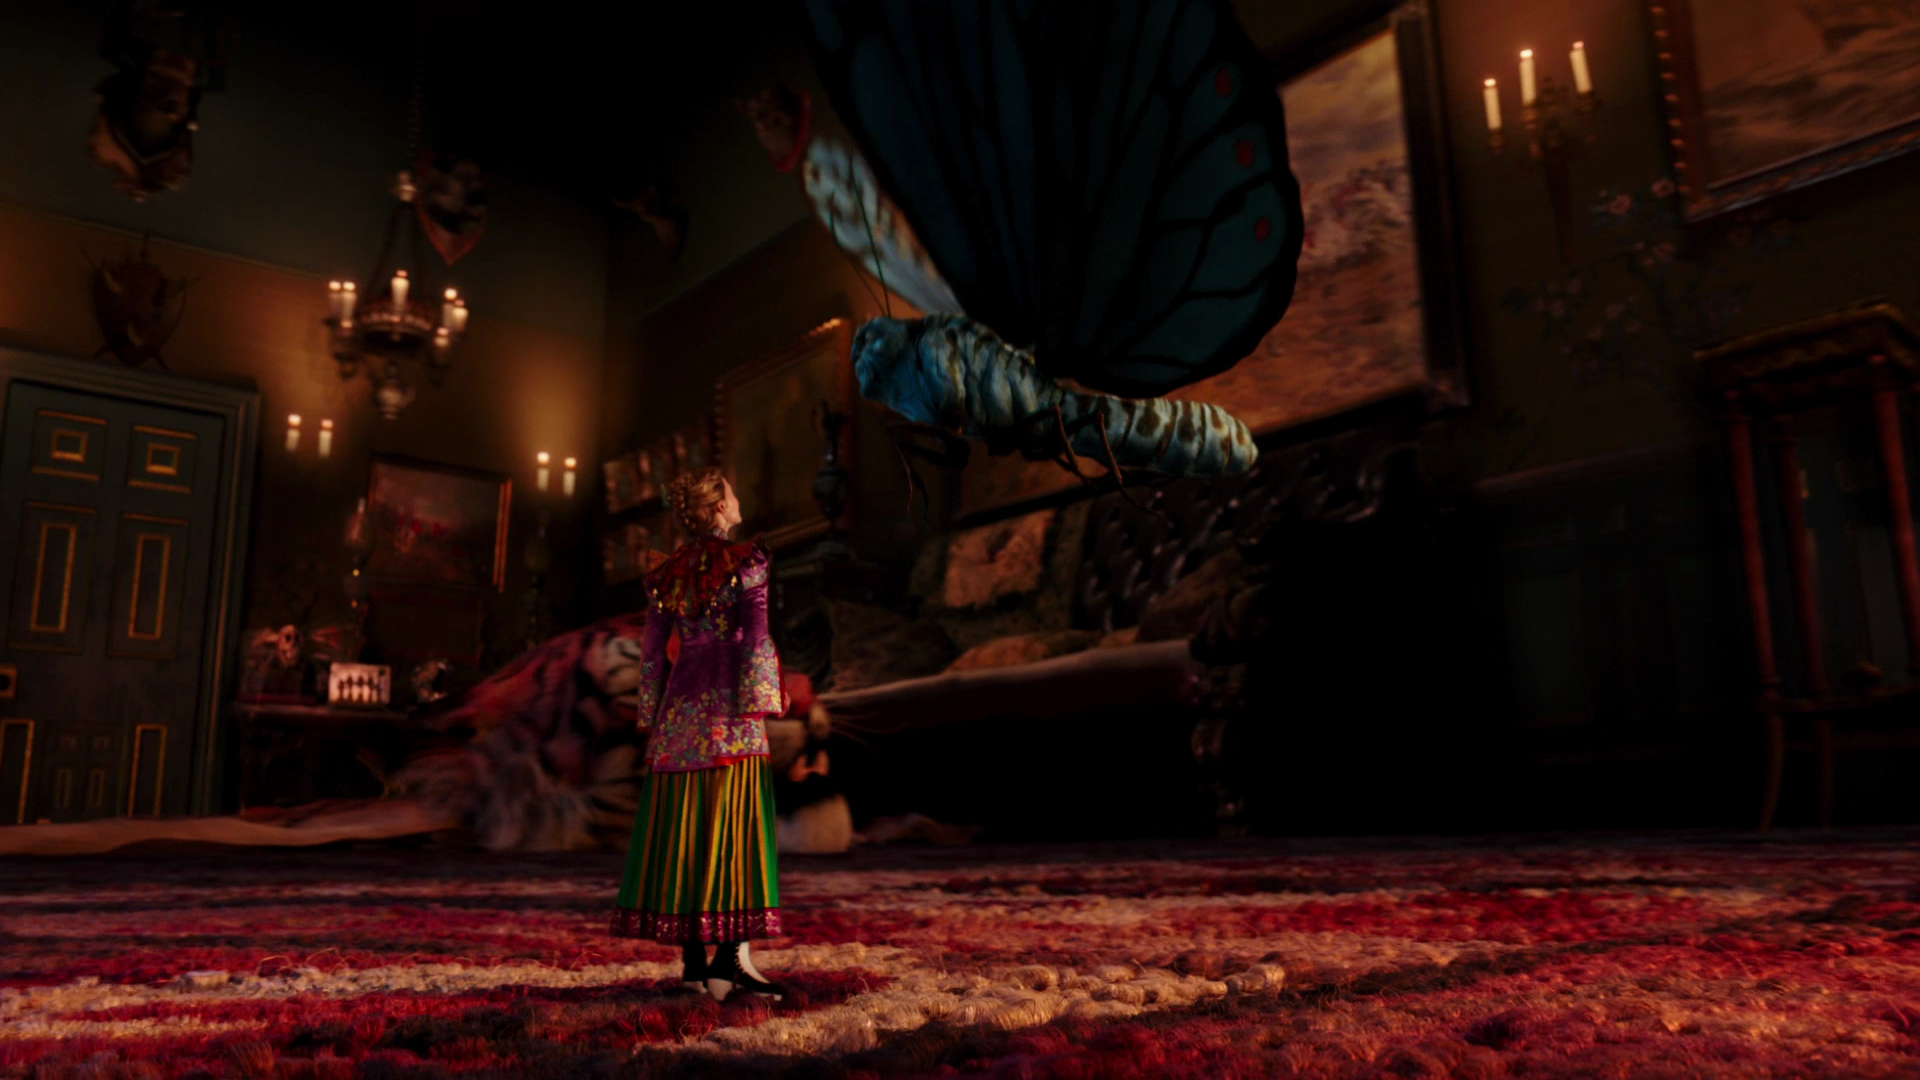 1 Alice_Through_The_Looking_Glass_HD_Screencaps-6.png